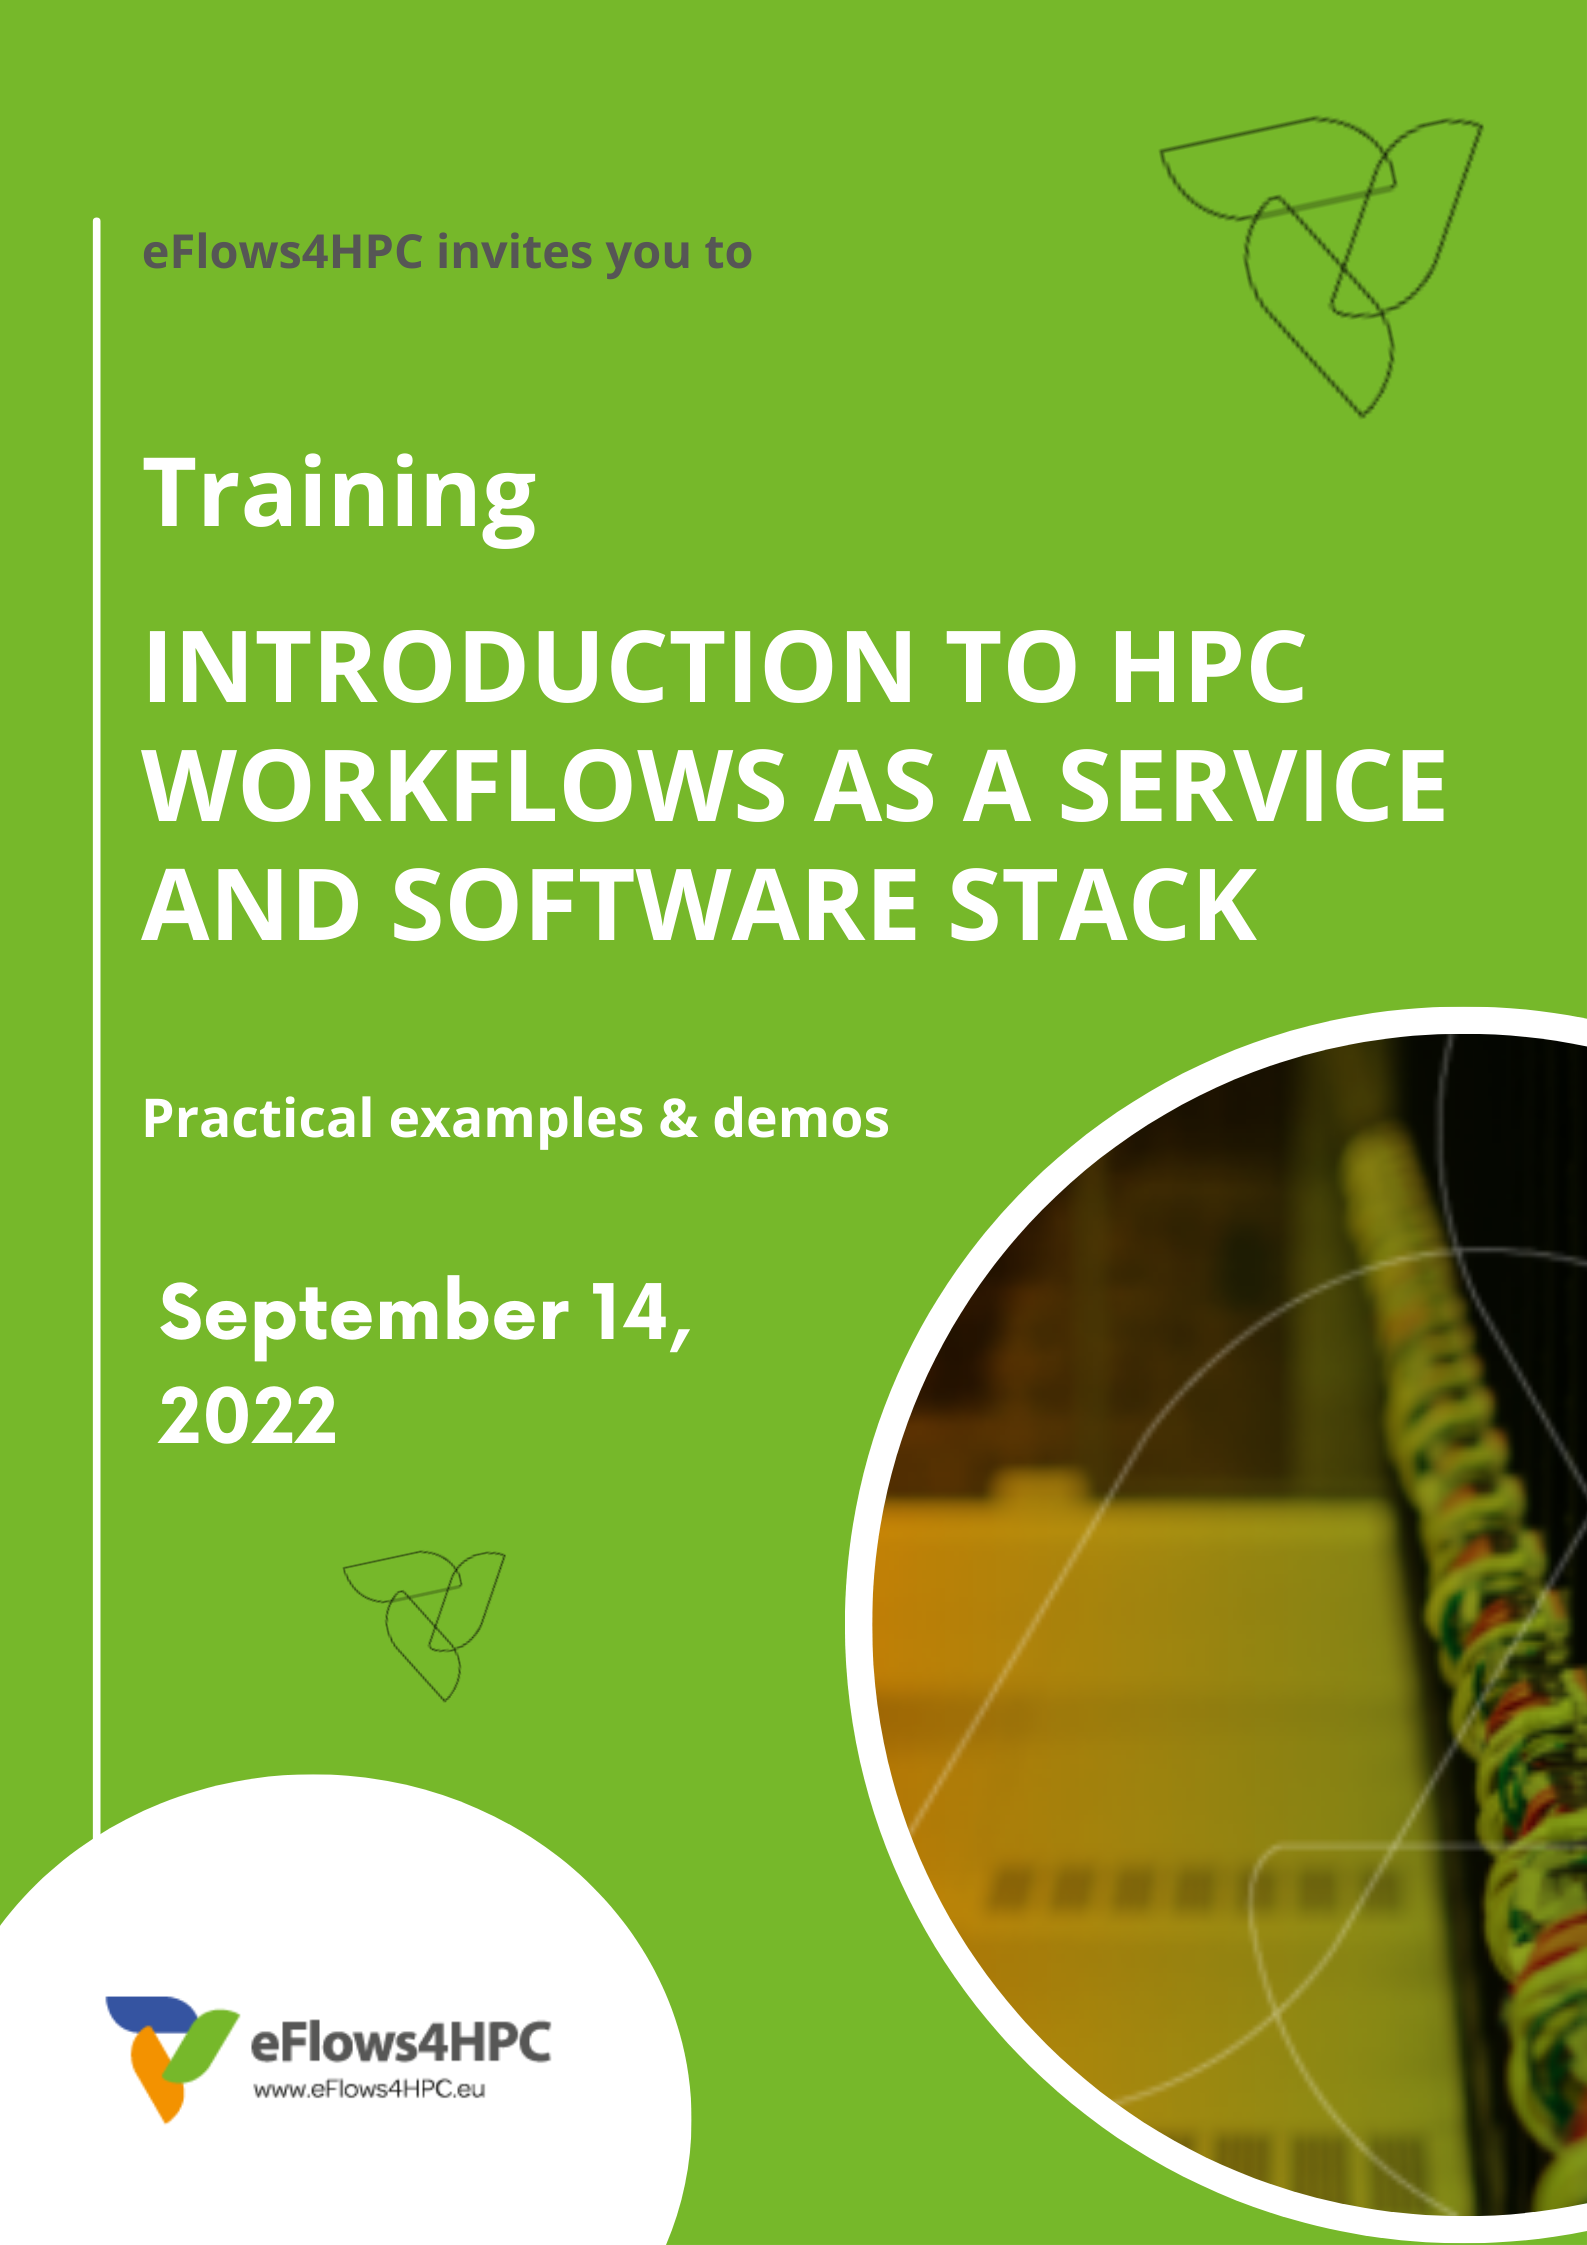 INTRODUCTION TO HPC WORKFLOWS AS A SERVICE AND SOFTWARE STACK